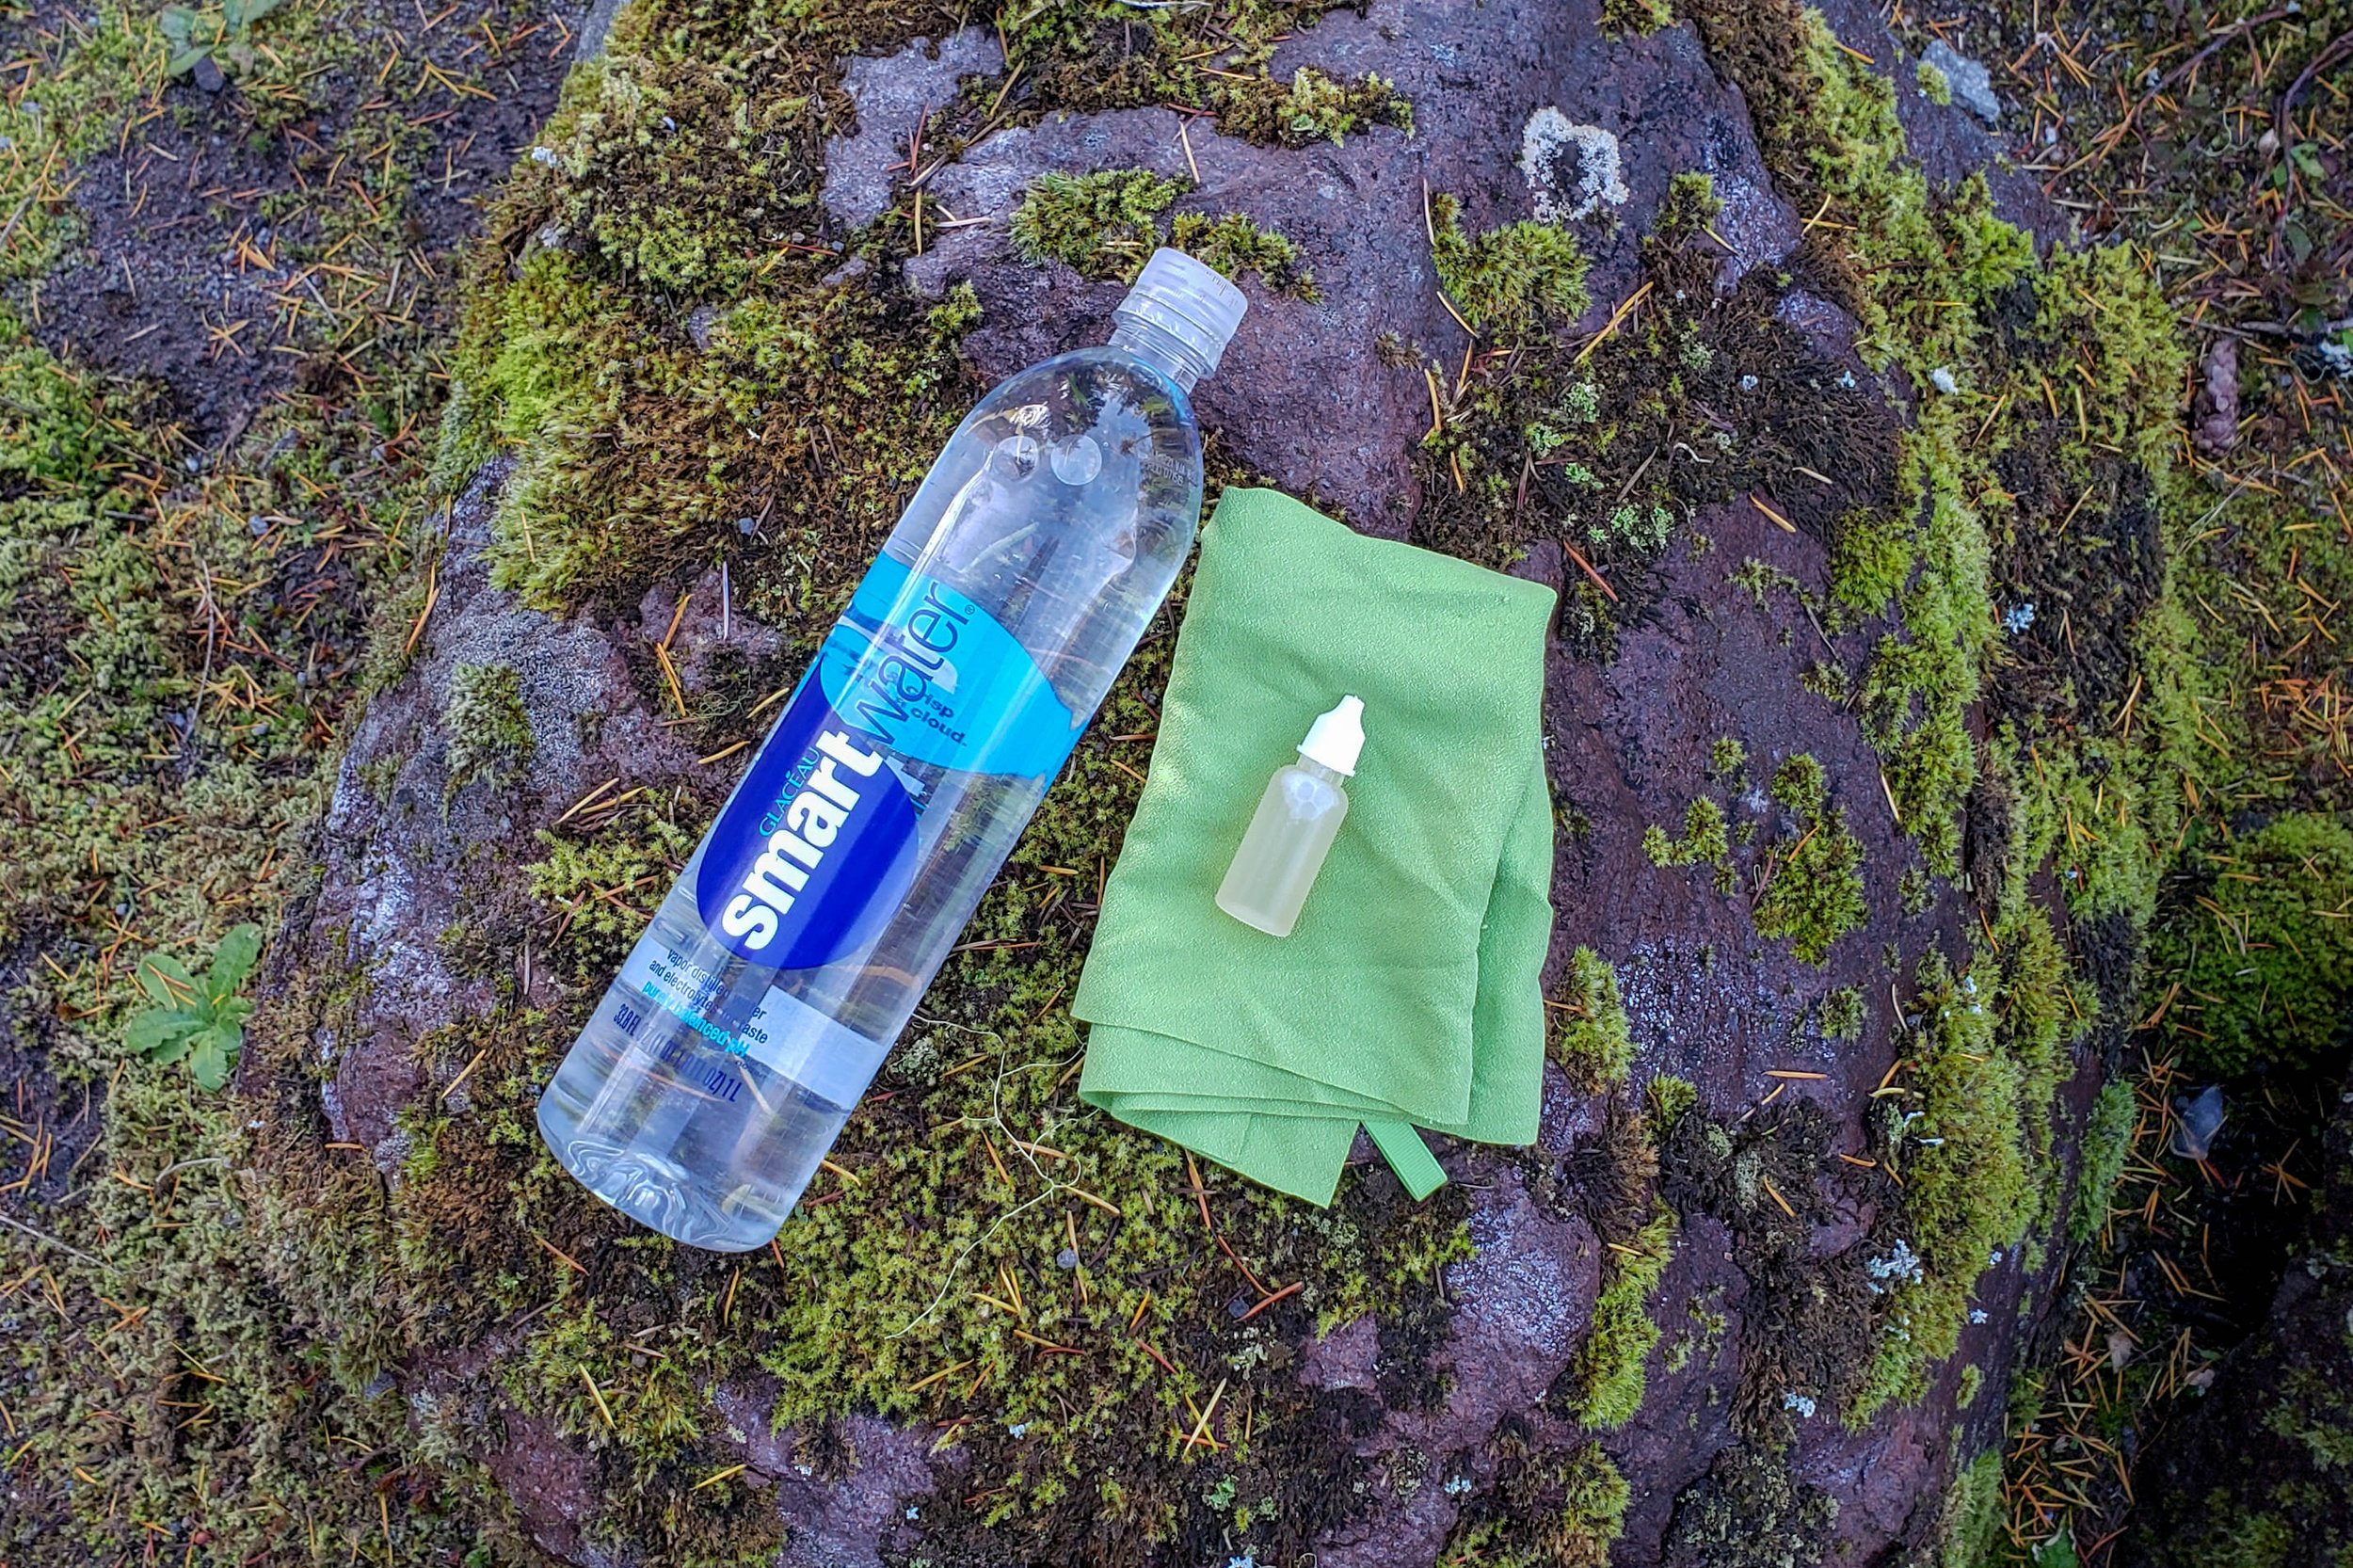 Top-down view of a water bottle, a pack towel, and a small bottle of biodegradable soap